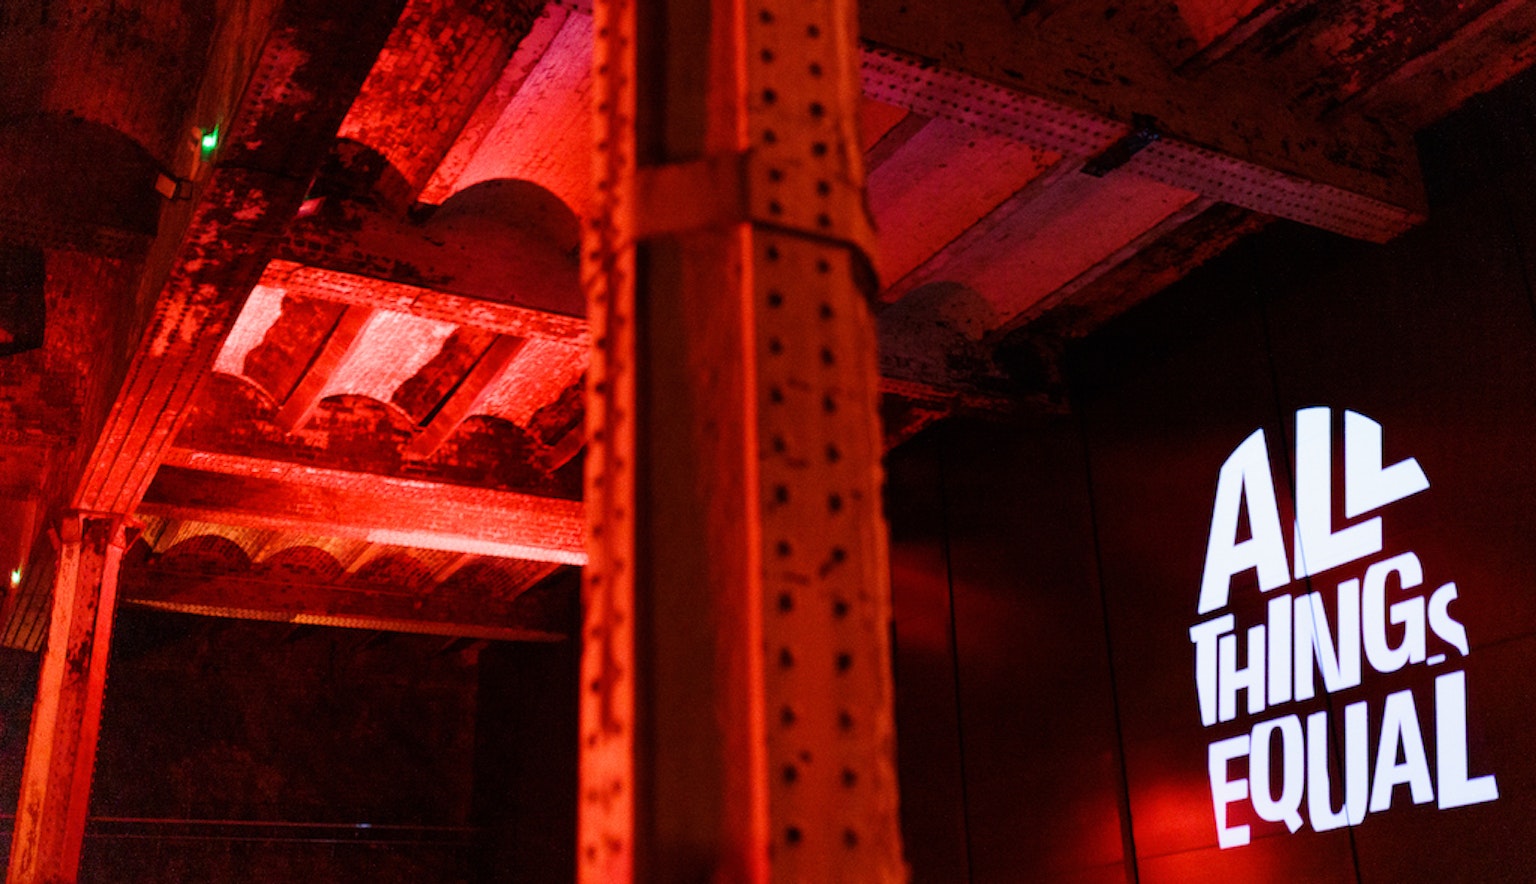 A warehouse ceiling with a metal beam in the middle of the shot, another off to the left. To the right on the wall is a projections of the All Things Equal logo. The room is lit up with a red glow.